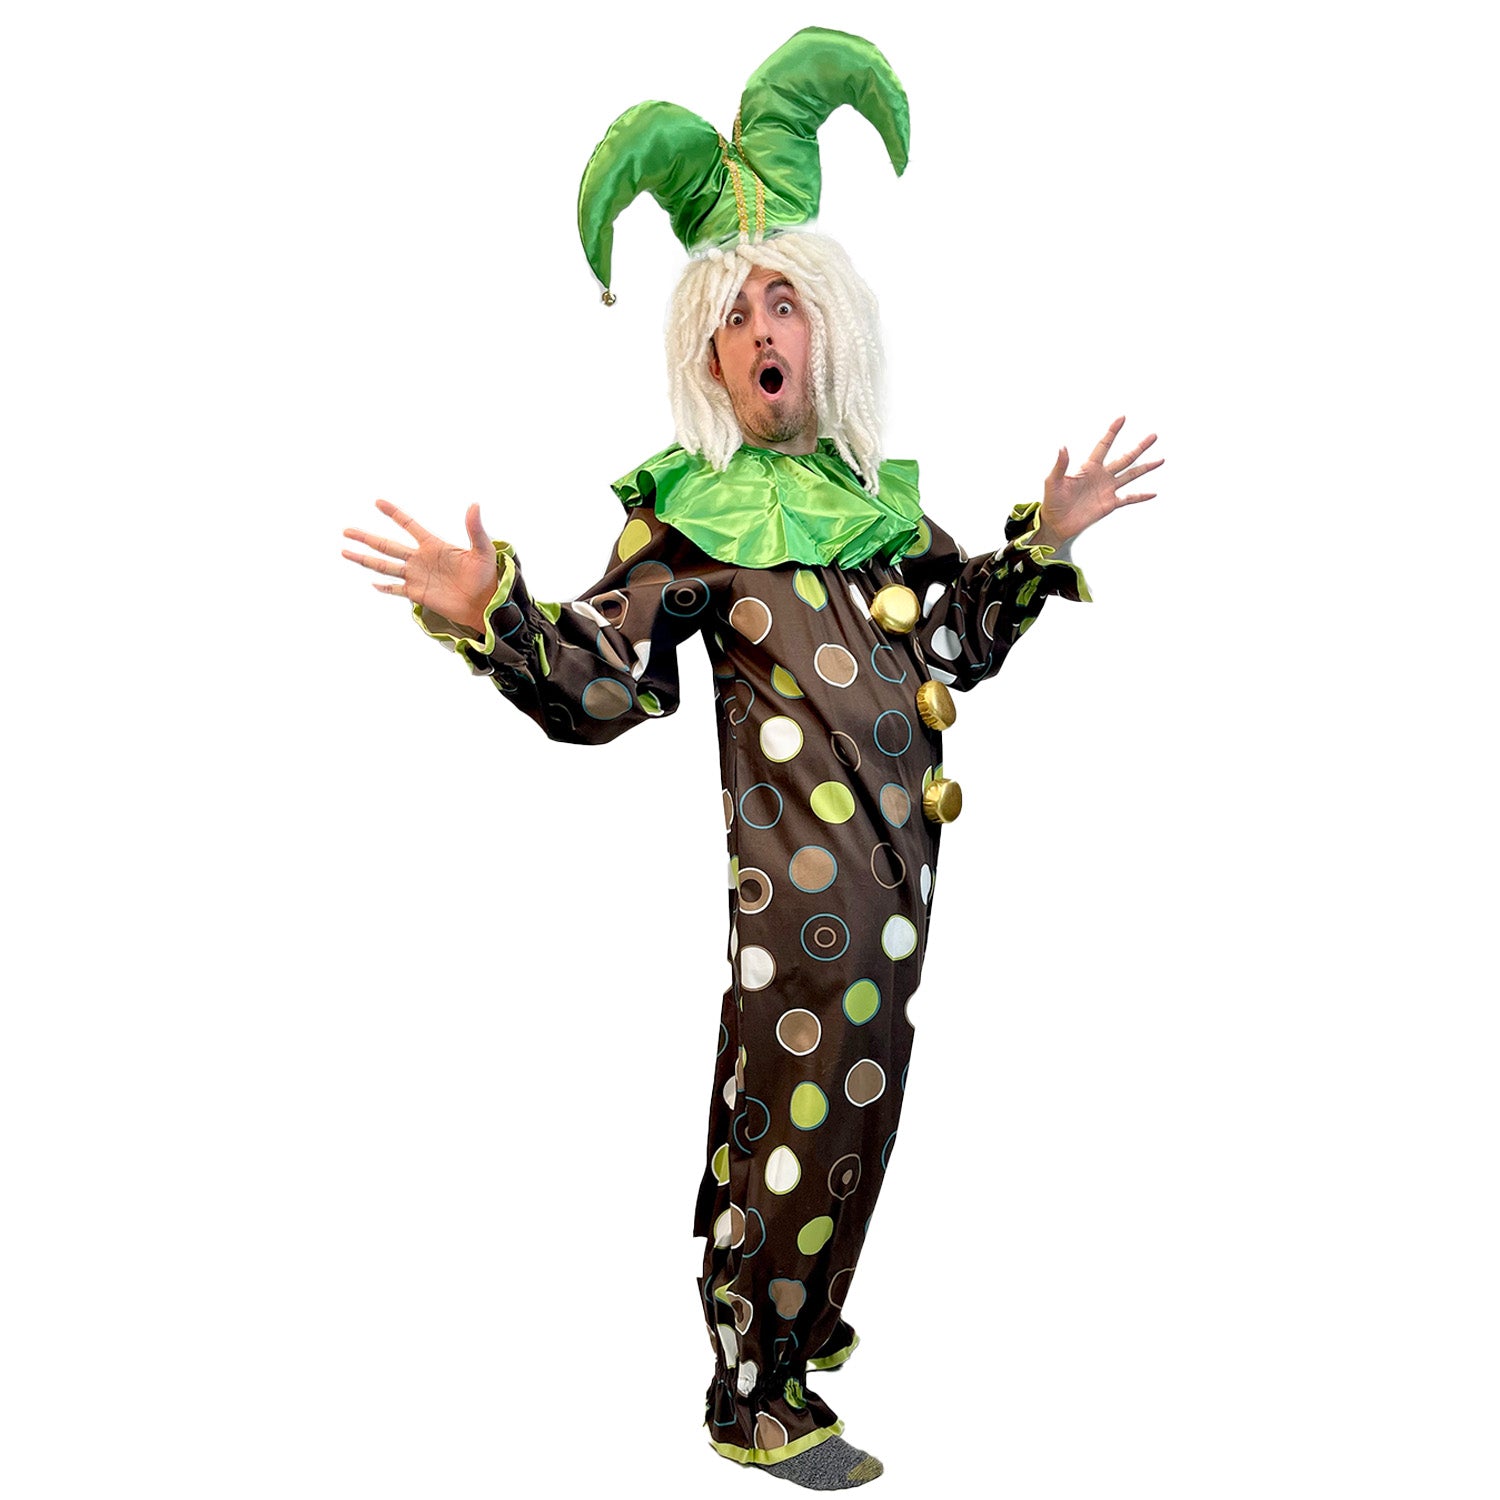 Brown and Green Polka Dot Clown Costume w/ Ruffle Collar and Jester Clown Hat